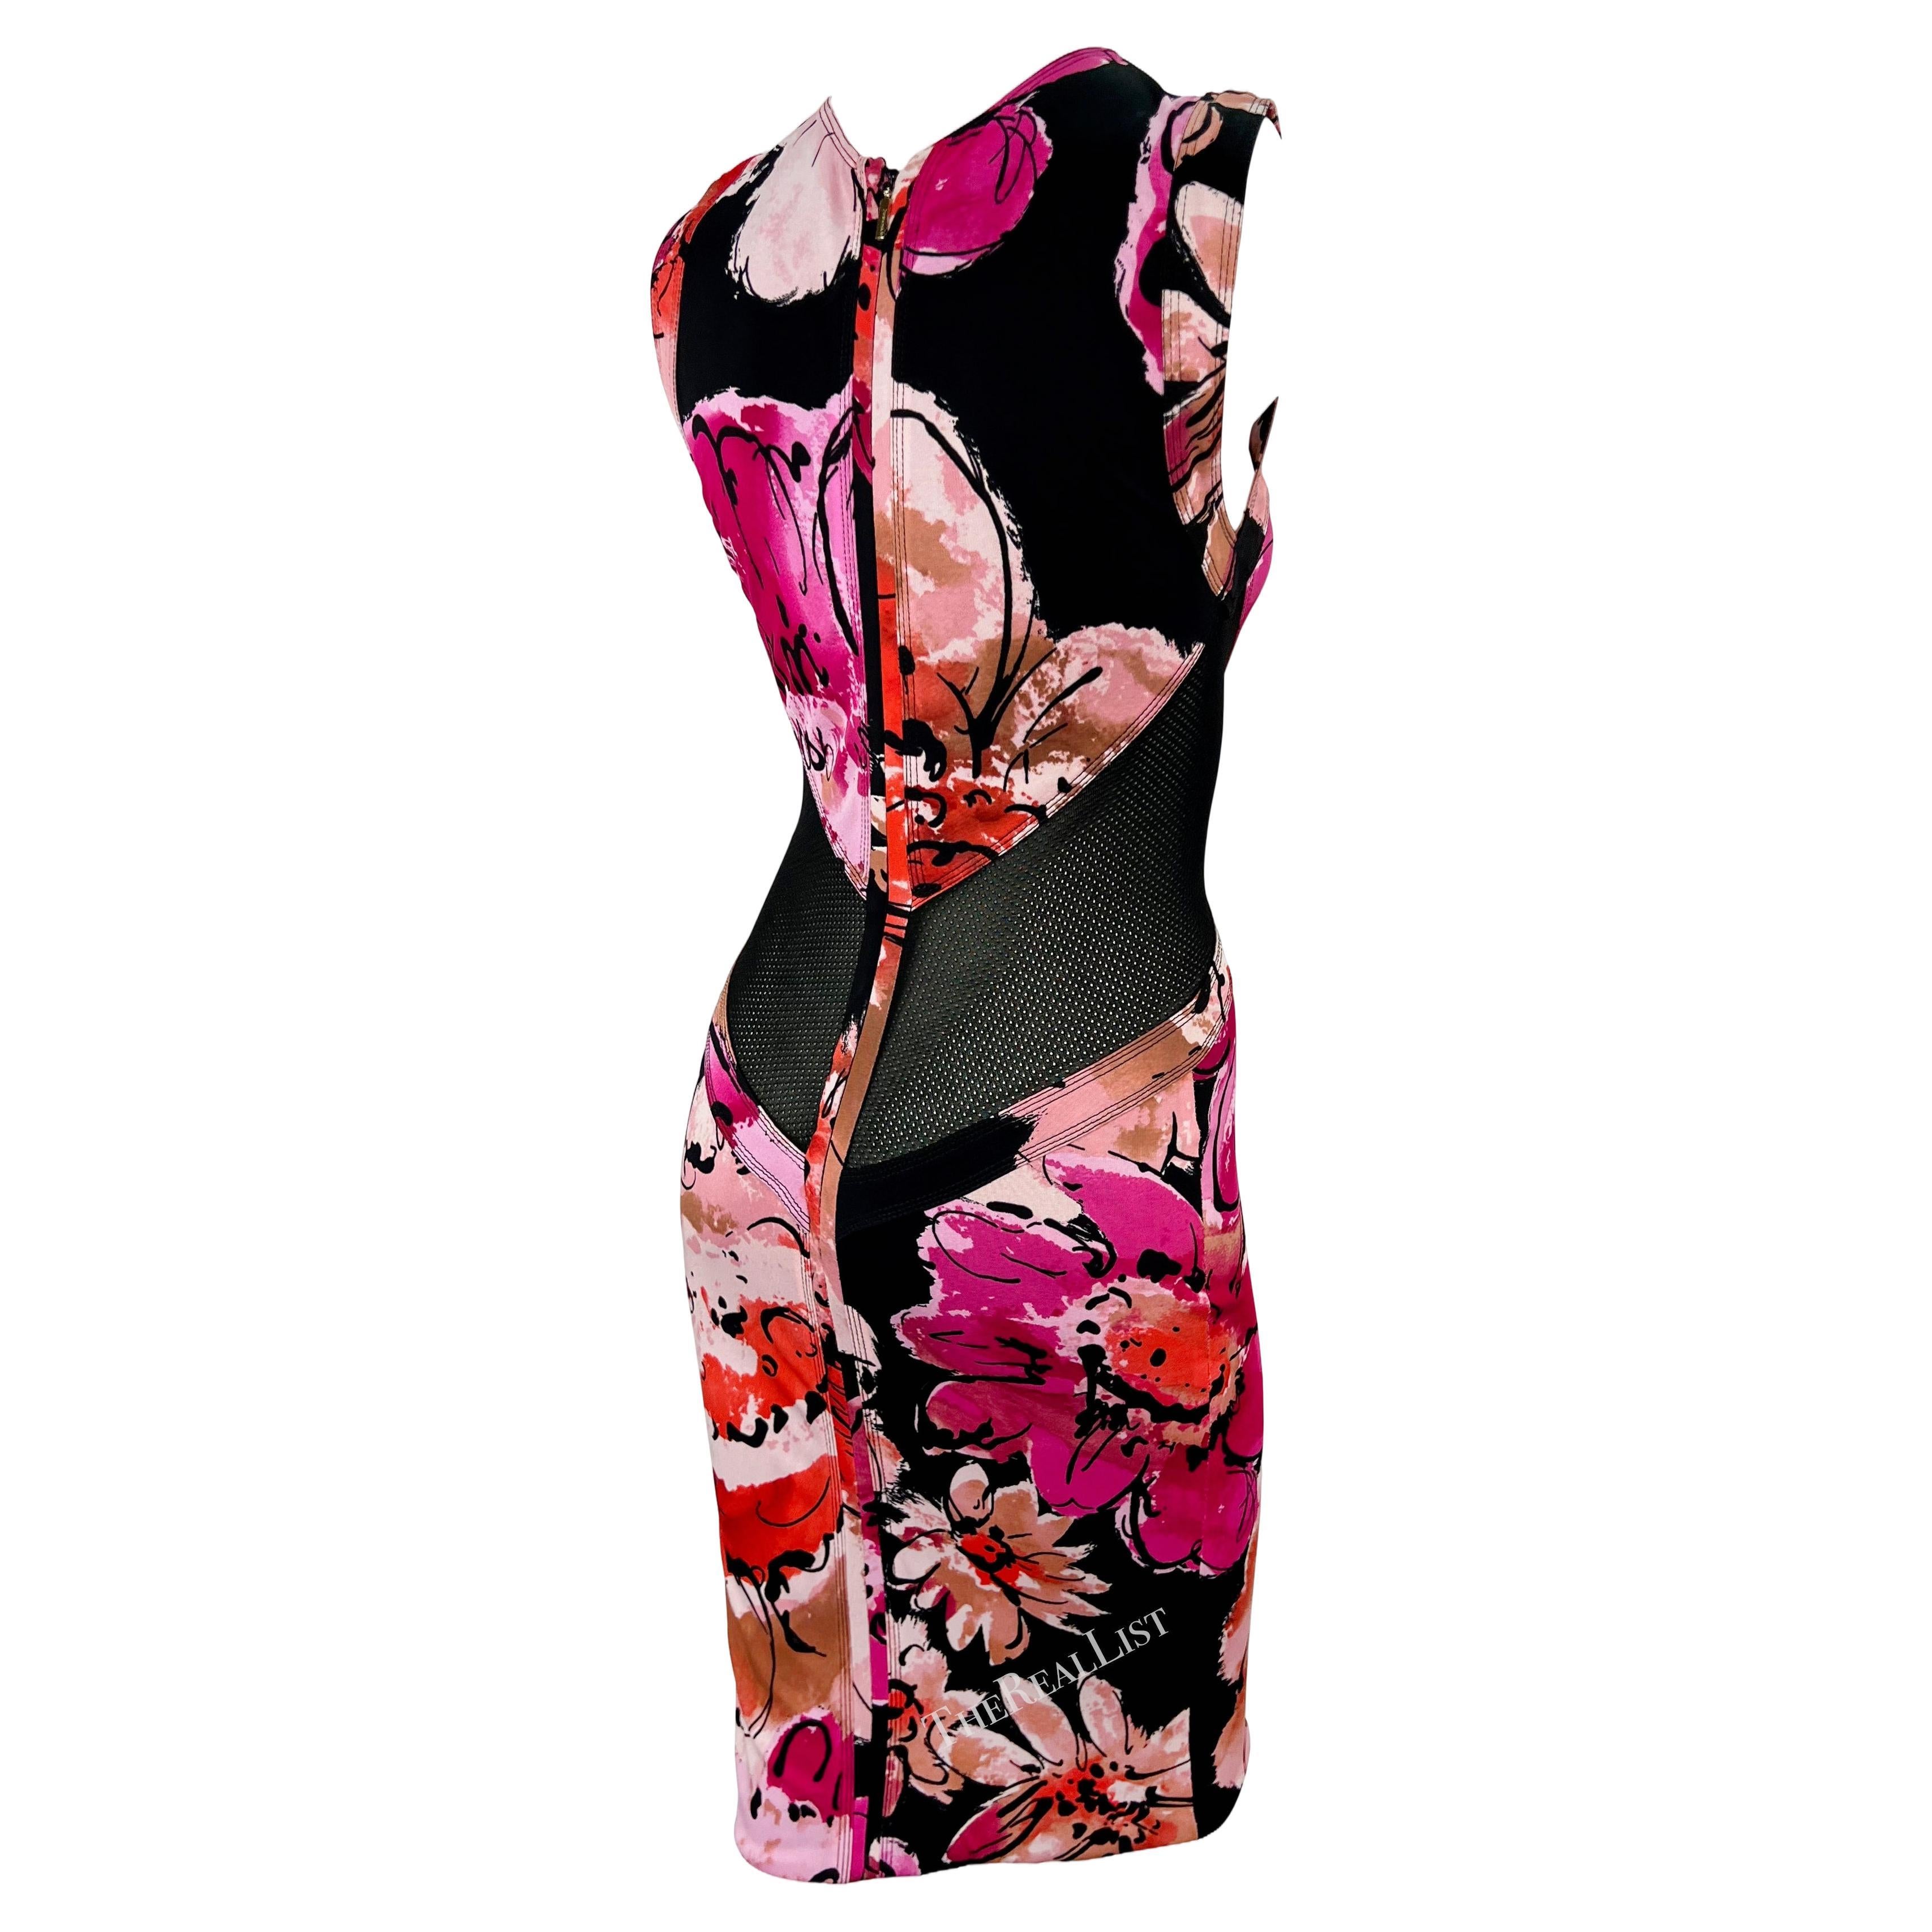 A chic pink floral mini dress by Donatella Versace for Gianni Versace from the early 2000s. This stretchy, form-fitting dress showcases a bold abstract floral print.The sleeveless dress features a crew neckline and is made complete with two black